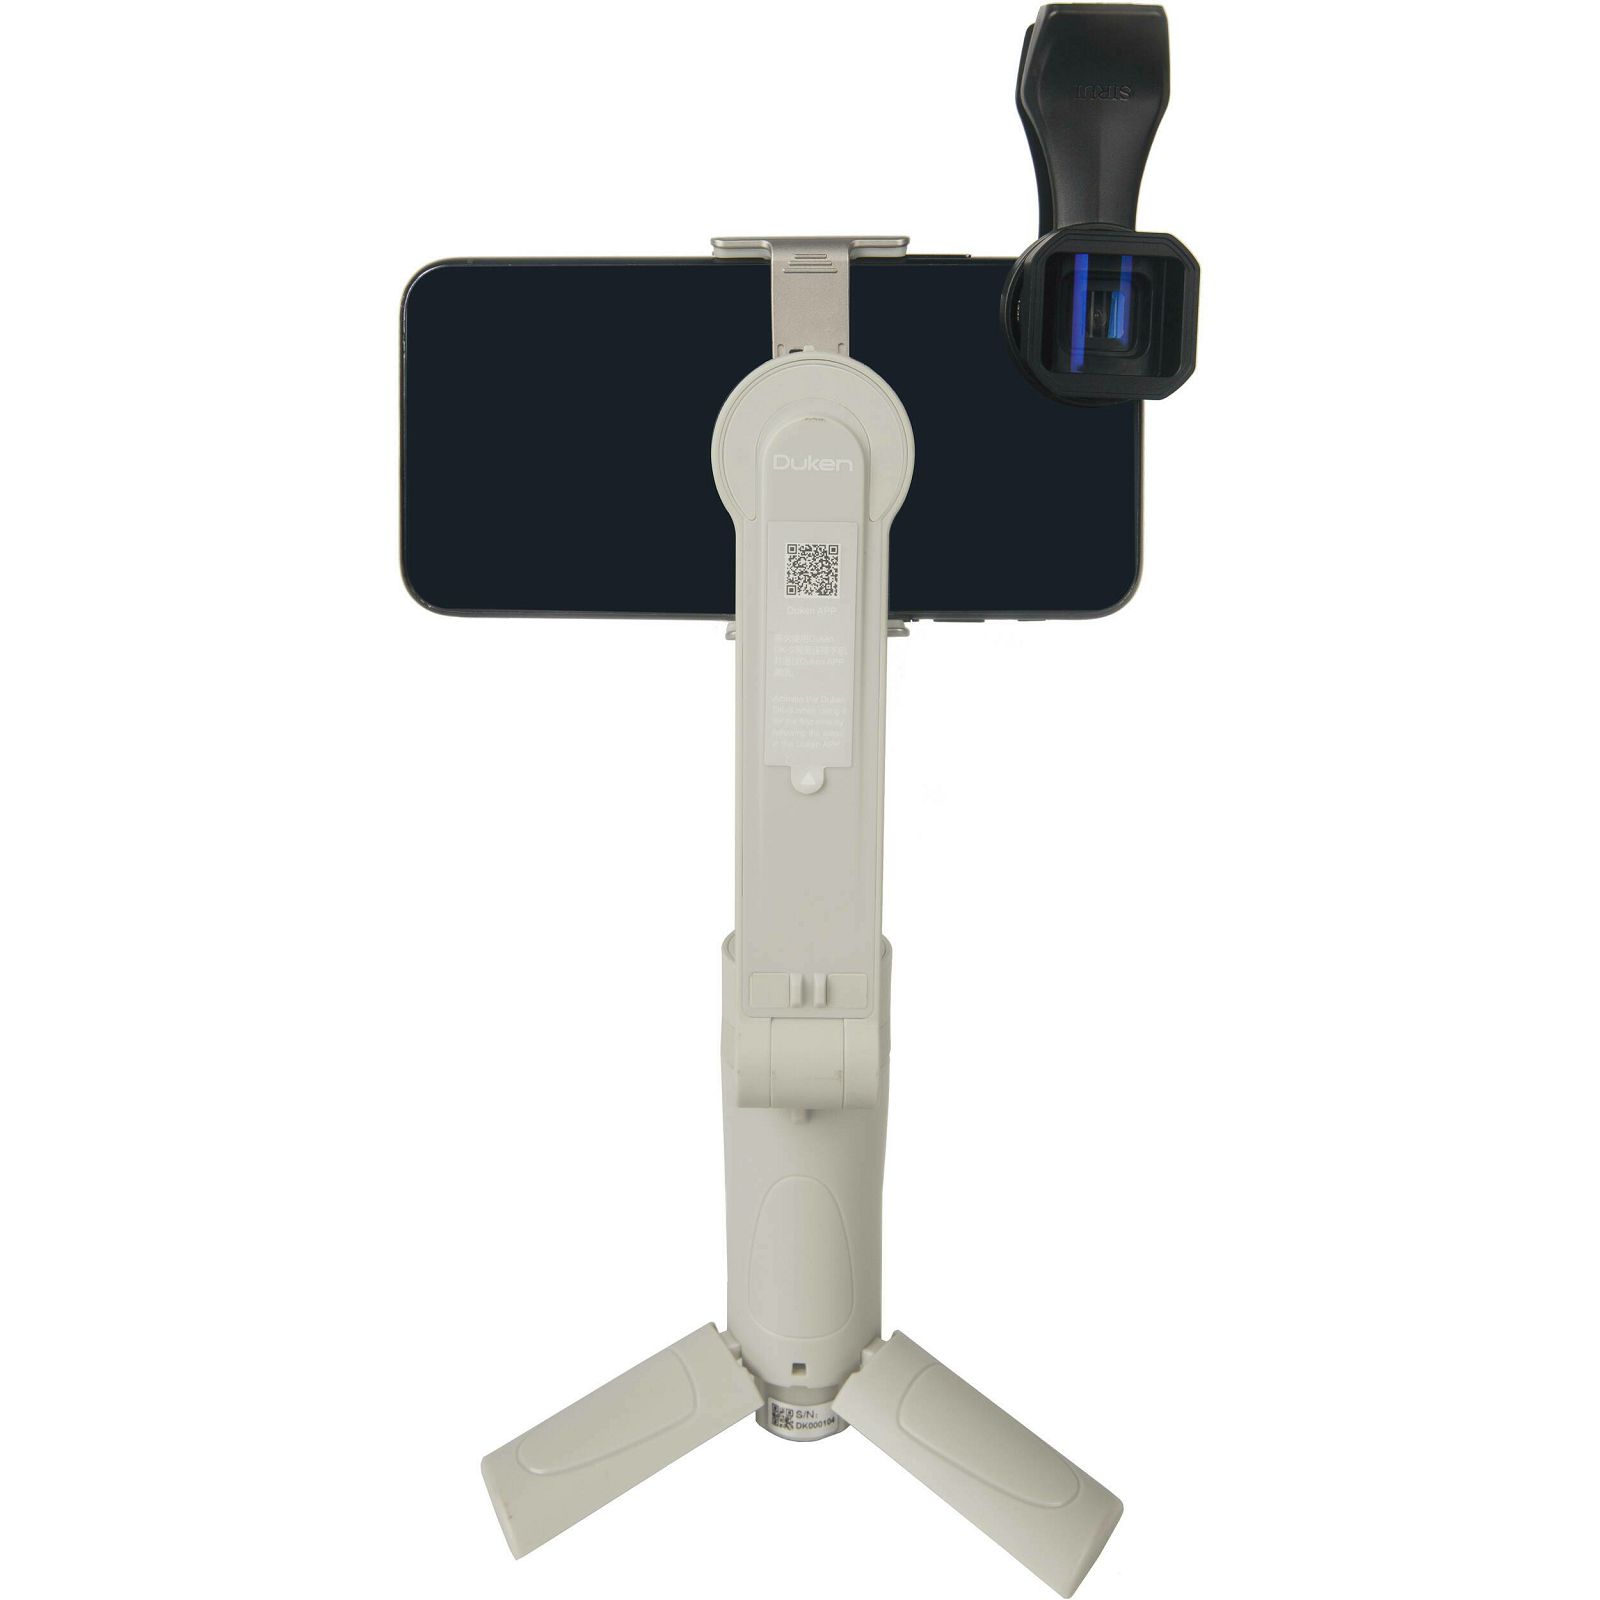 Sirui Duken DK-SL+VD-01 Switch X Smartphone Stabilizer Gimbal (Light Grey) with Anamorphic Lens for Smartphone 